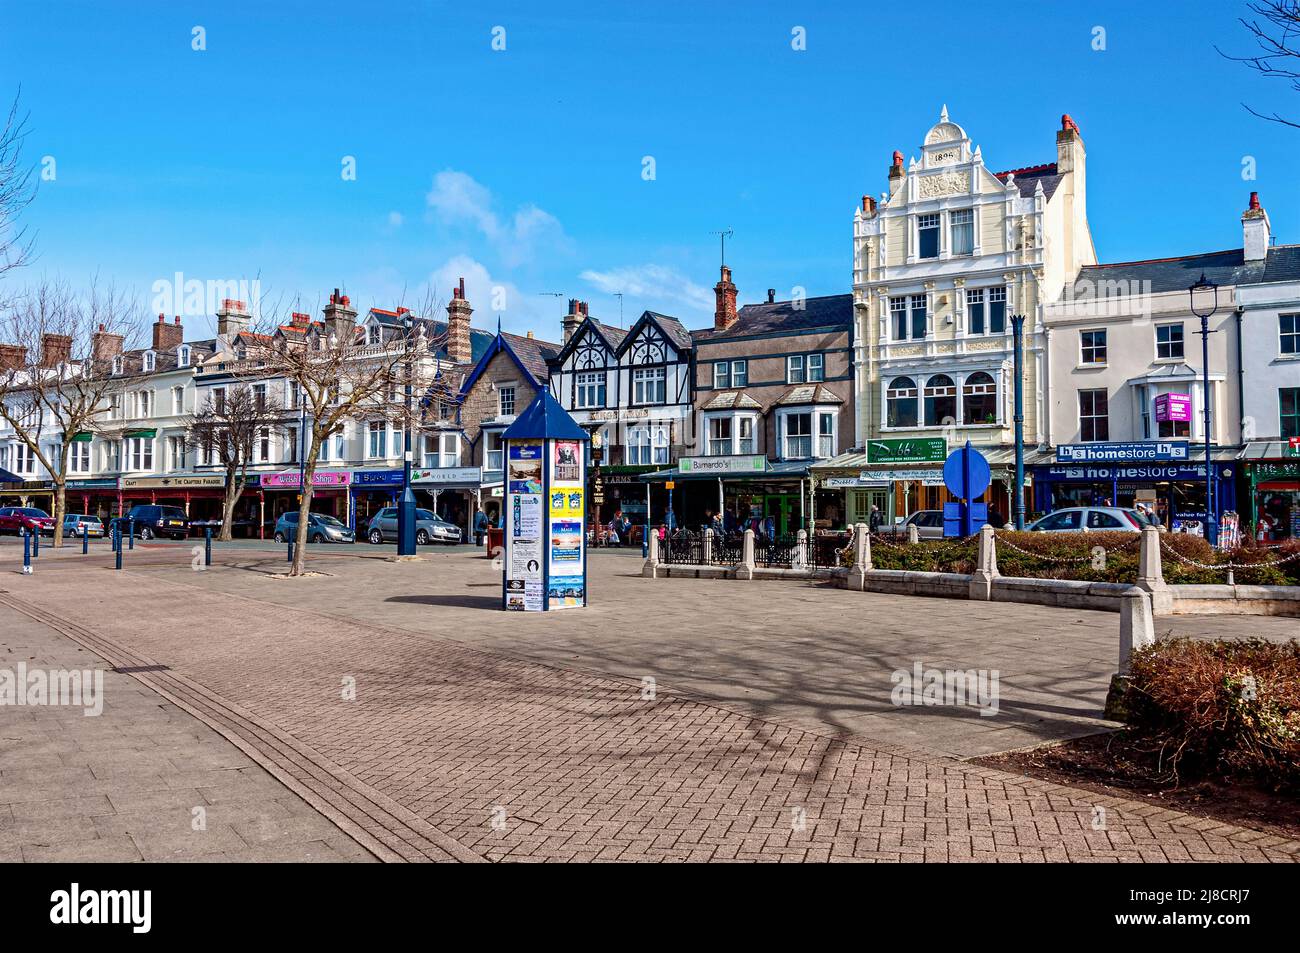 A peaceful paved square with a herring bone patterned strip and shrubbery beds faces a parade filled with interesting shops and other businesses Stock Photo